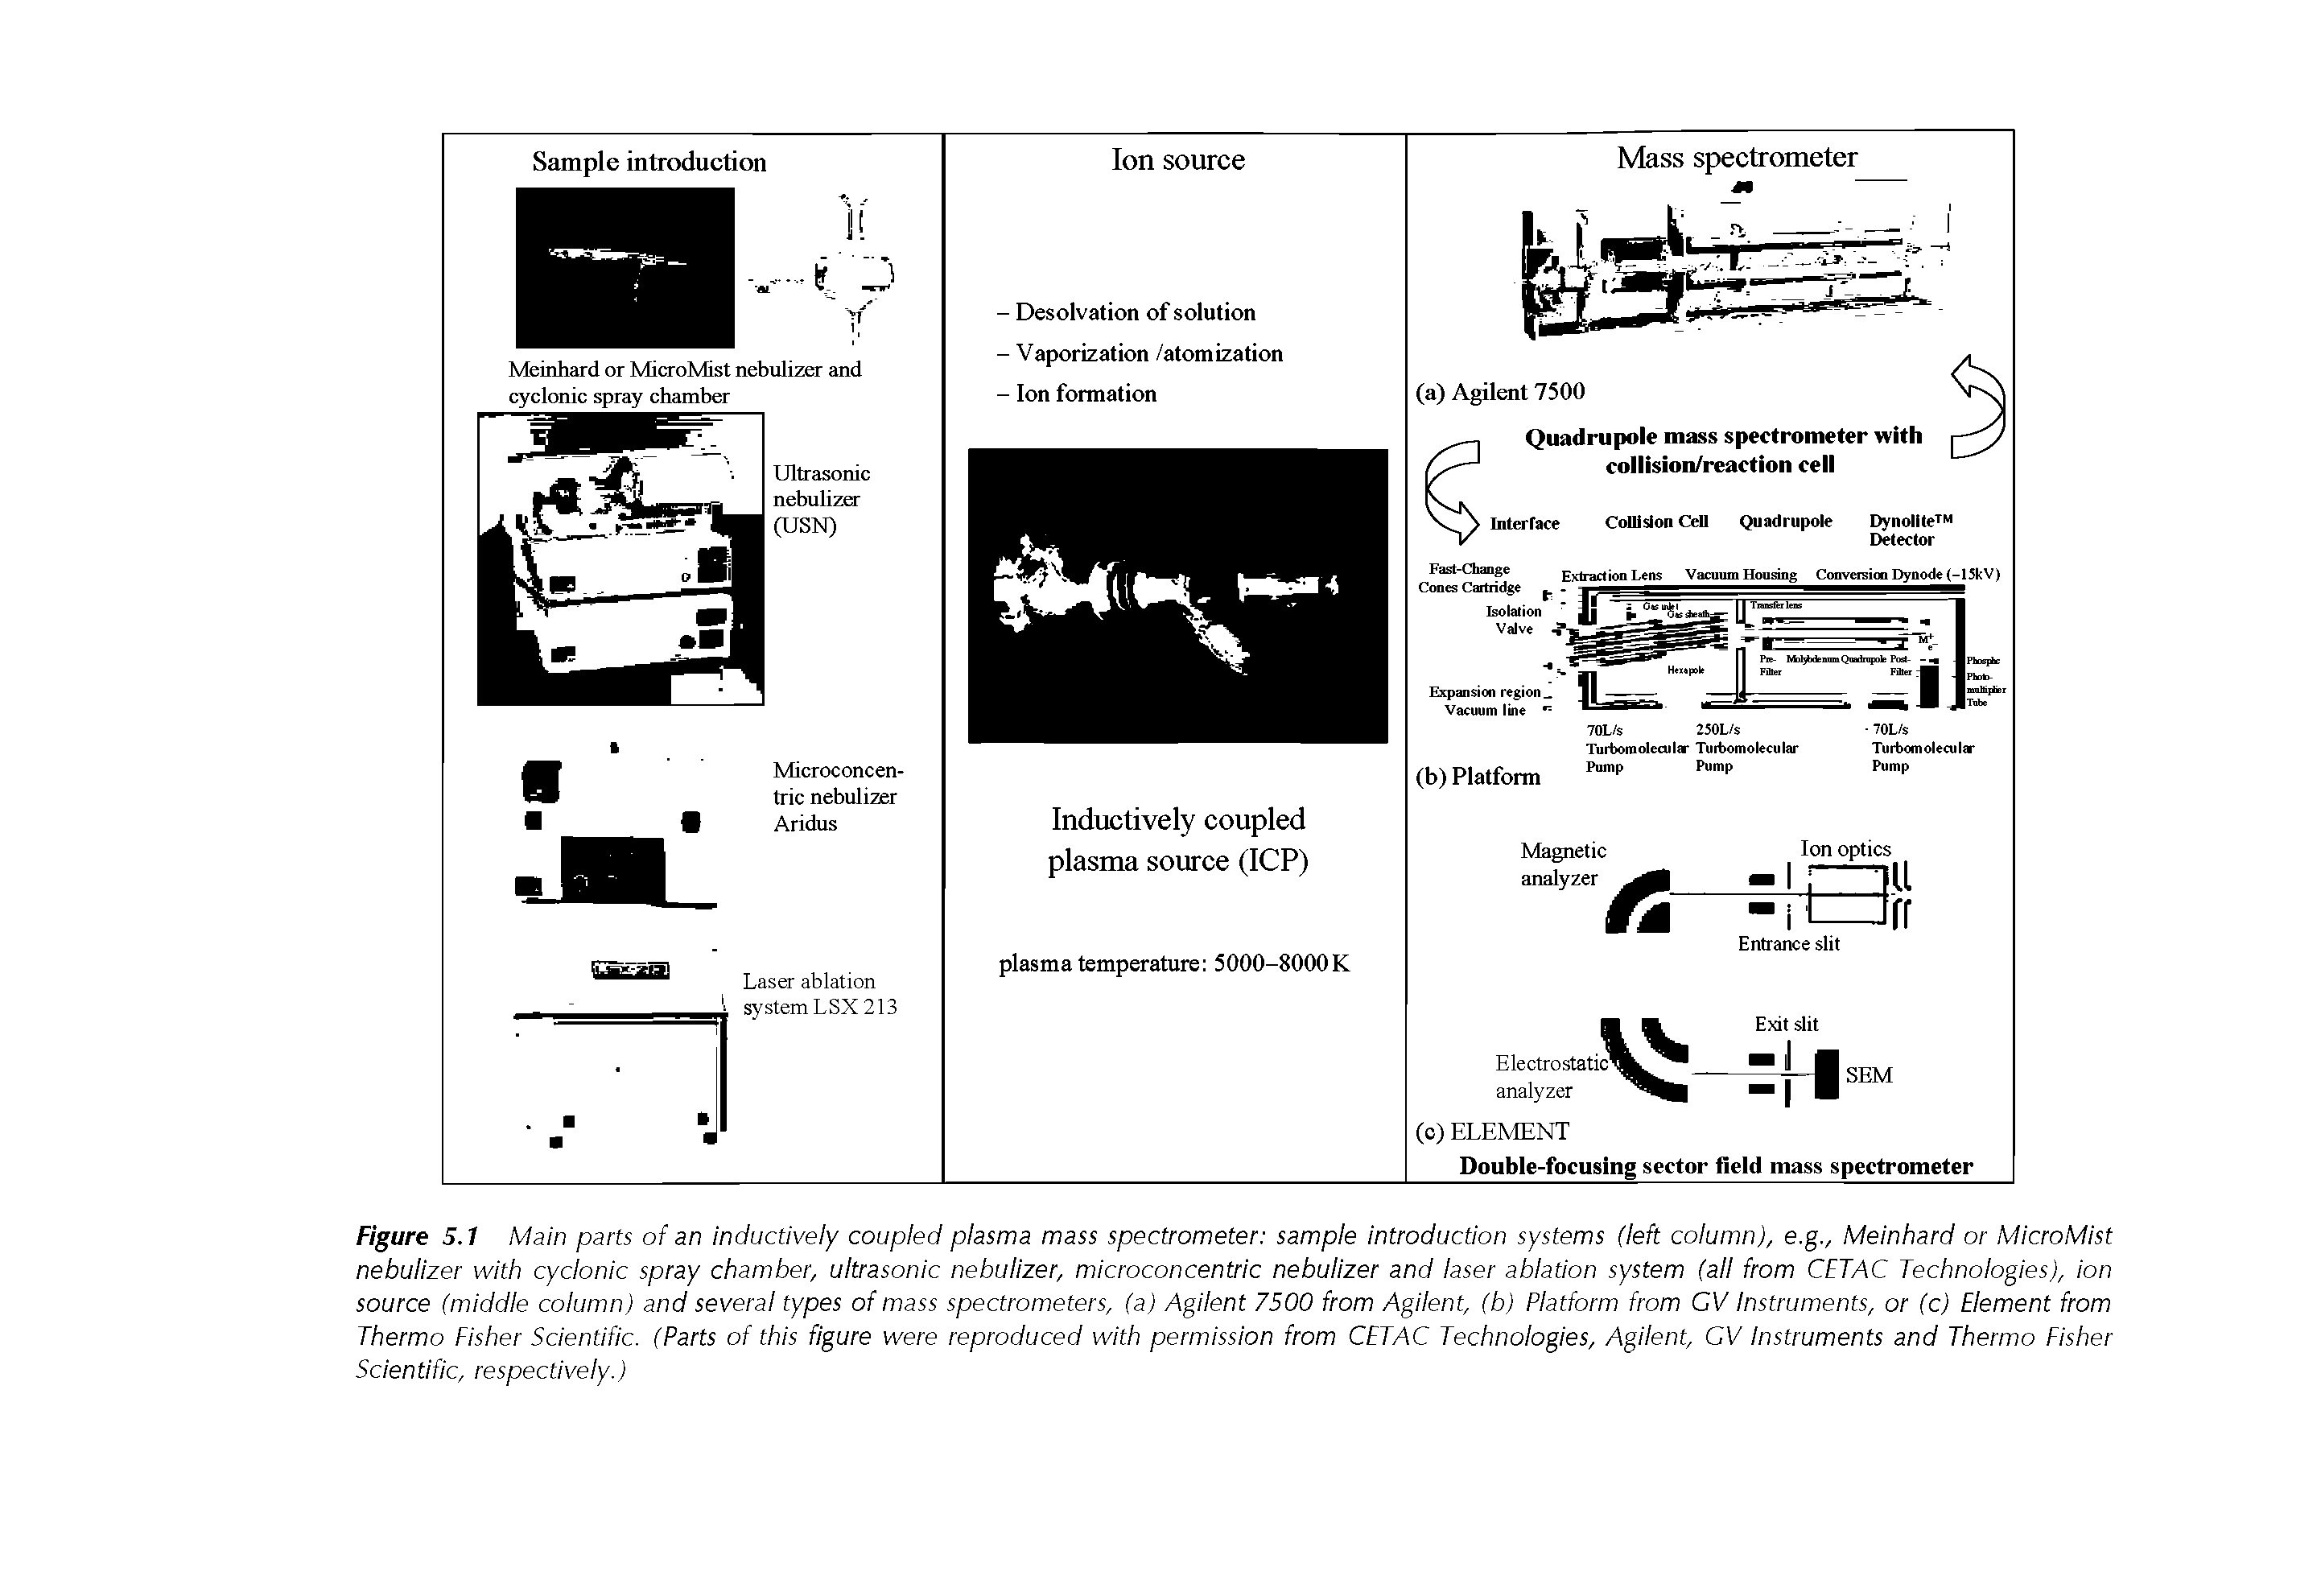 Figure 5.1 Main parts of an inductively coupled plasma mass spectrometer sample introduction systems (left column), e.g., Meinhard or MicroMist nebulizer with cyclonic spray chamber, ultrasonic nebulizer, microconcentric nebulizer and laser ablation system (all from CETAC Technologies), ion source (middle column) and several types of mass spectrometers, (a) Agilent 7500 from Agilent, (b) Platform from CV Instruments, or (c) Element from Thermo Fisher Scientific. (Parts of this figure were reproduced with permission from CETAC Technologies, Agilent, CV Instruments and Thermo Tisher Scientific, respectively.)...